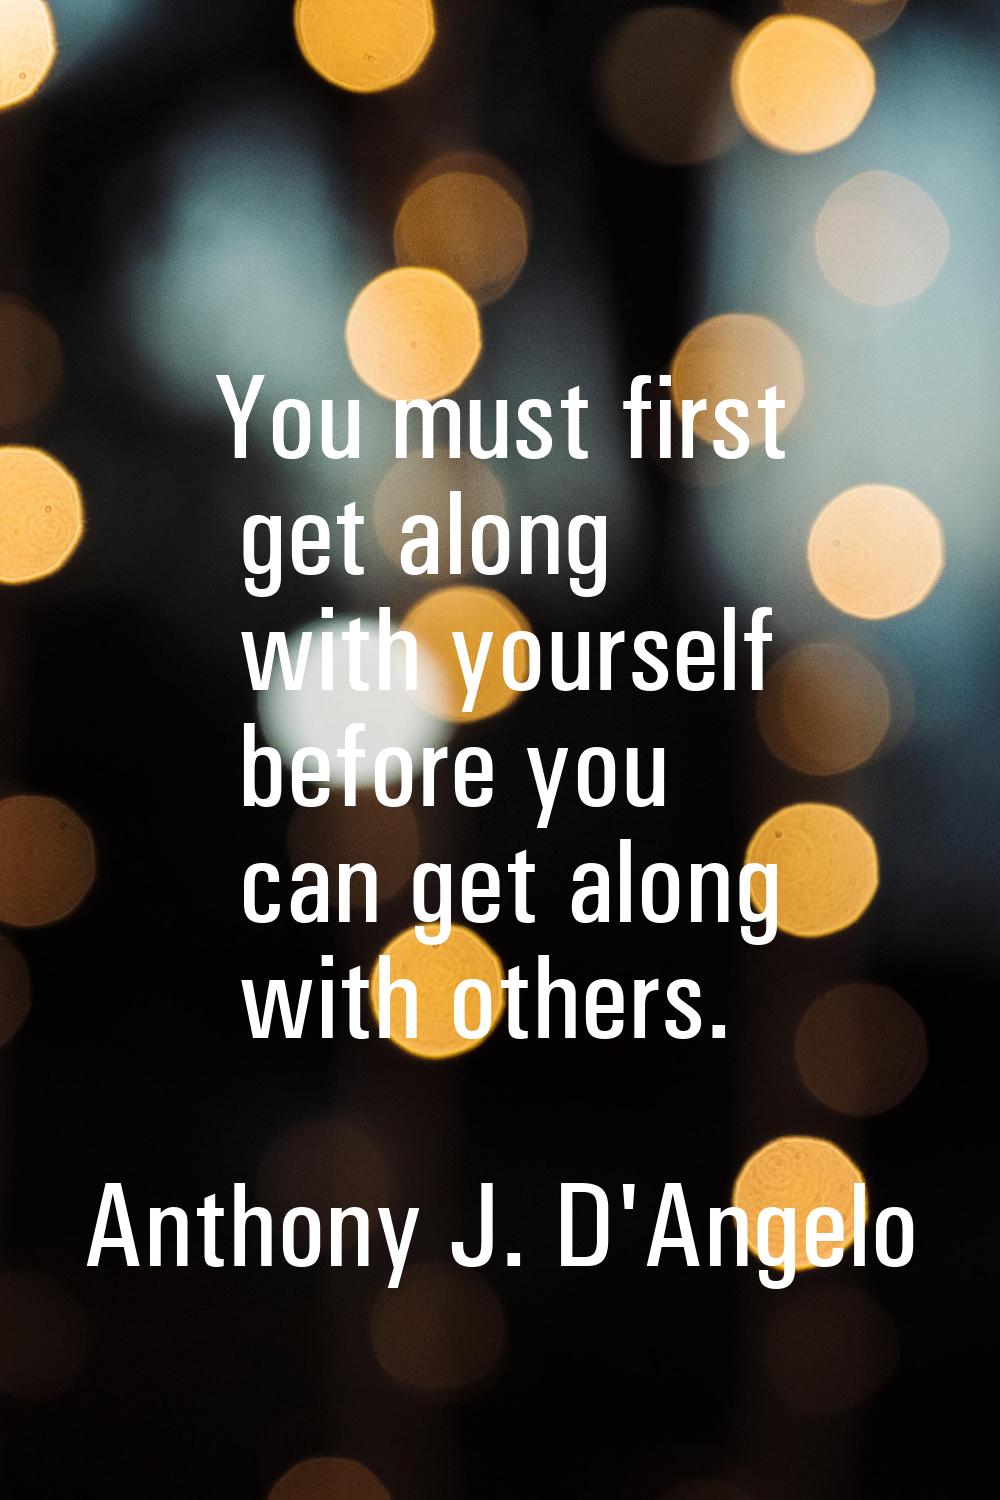 You must first get along with yourself before you can get along with others.